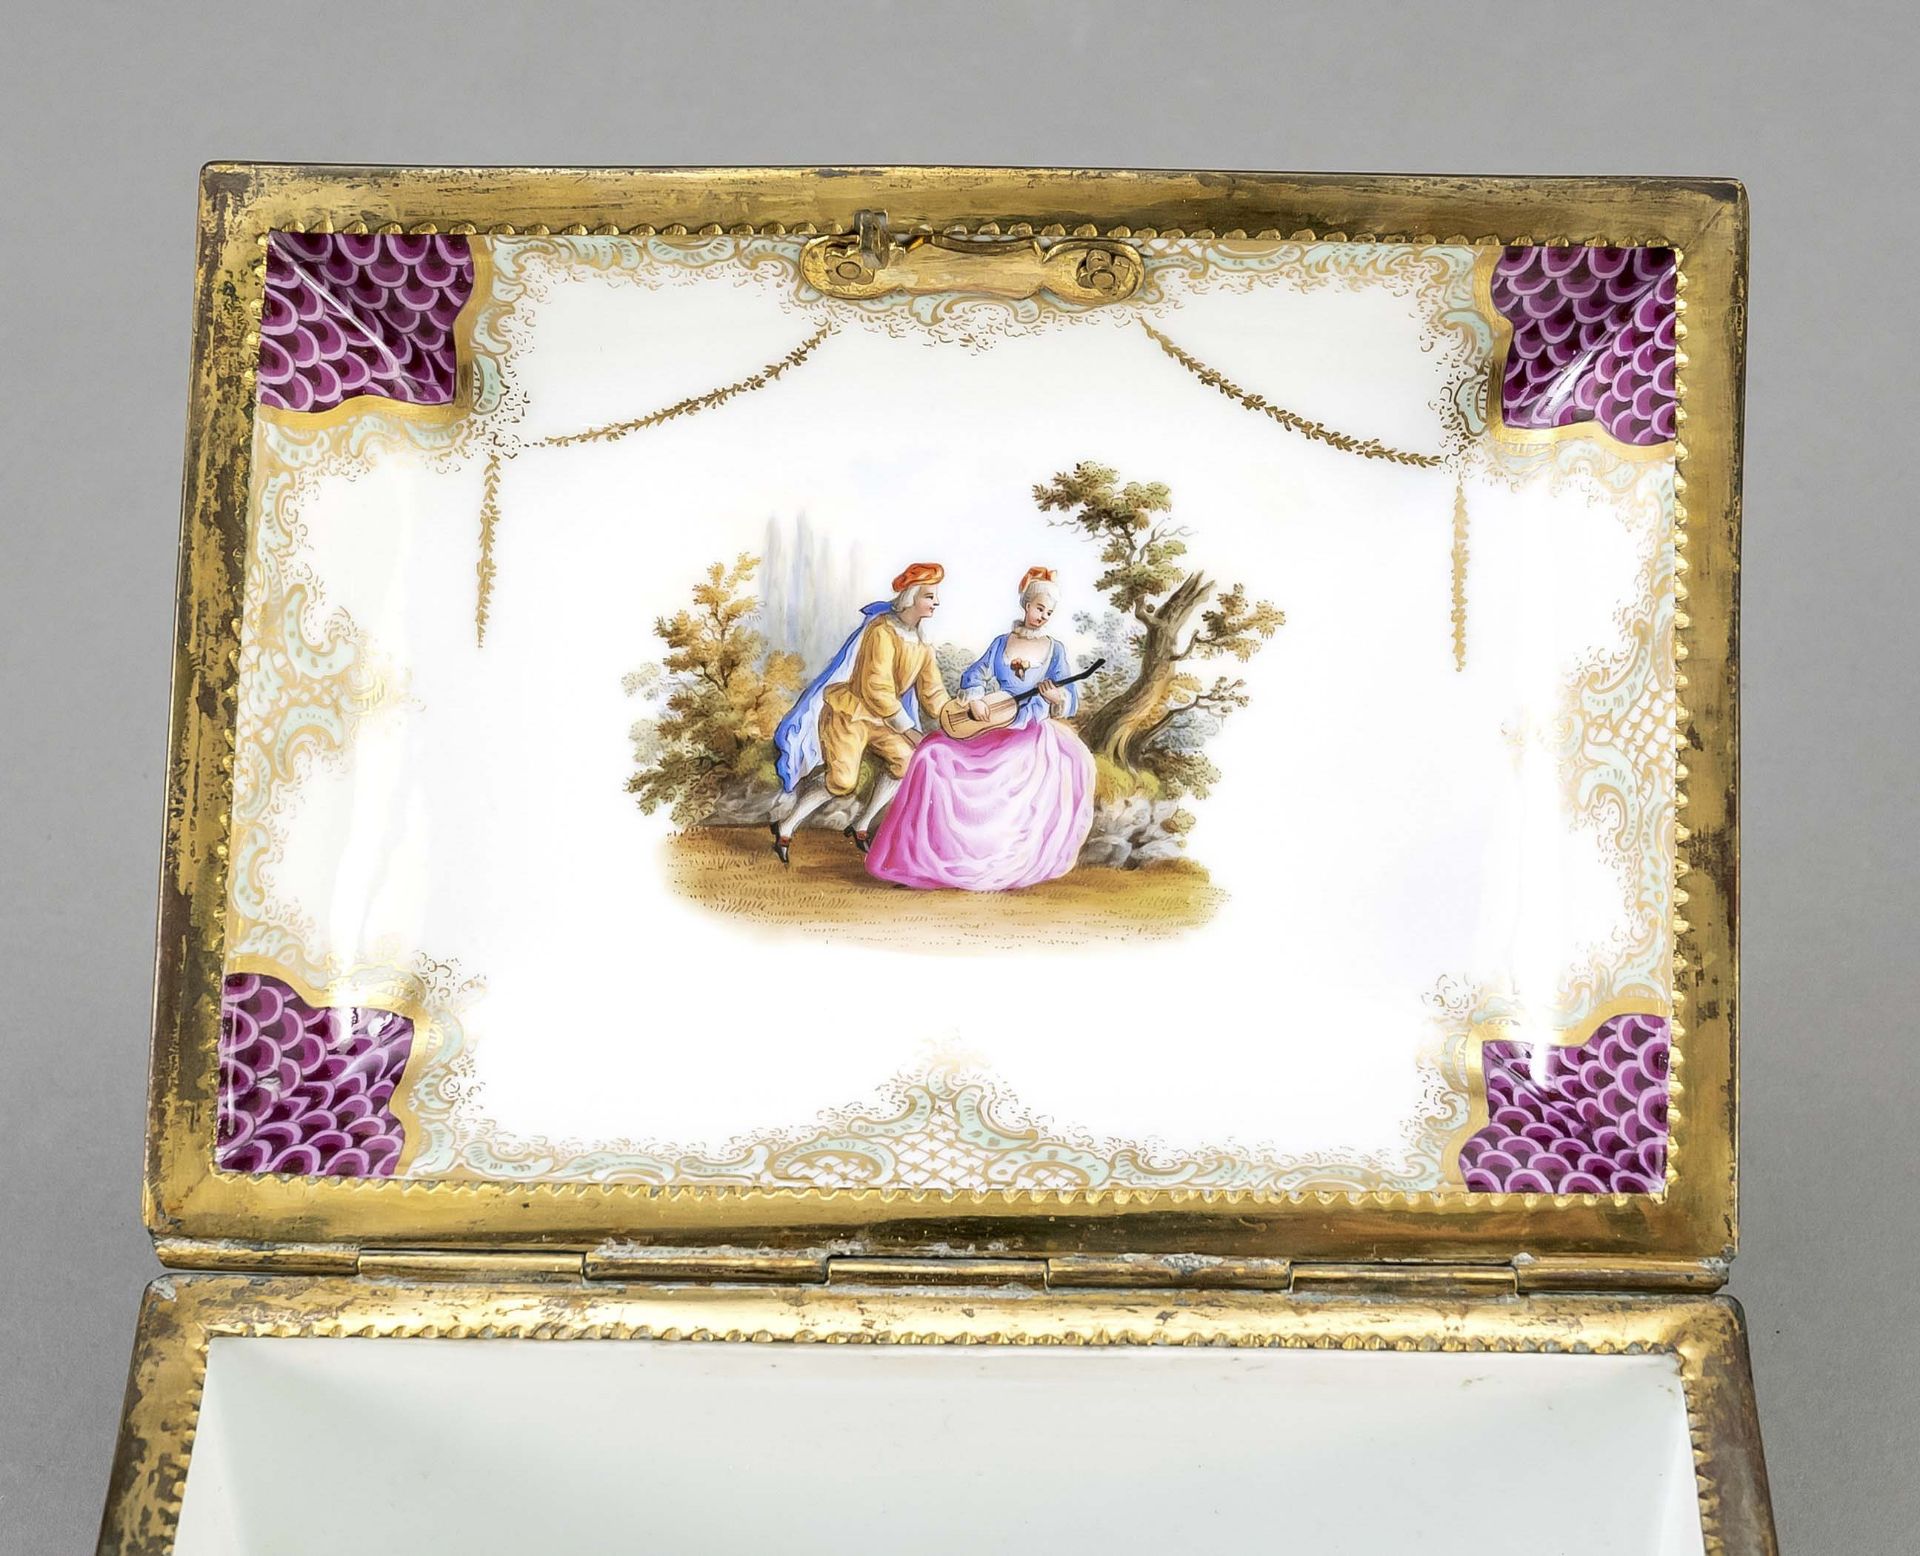 Lidded box in the style of Meissen, w. 18/19th c., fine polychrome painting with gallant couples - Image 3 of 7